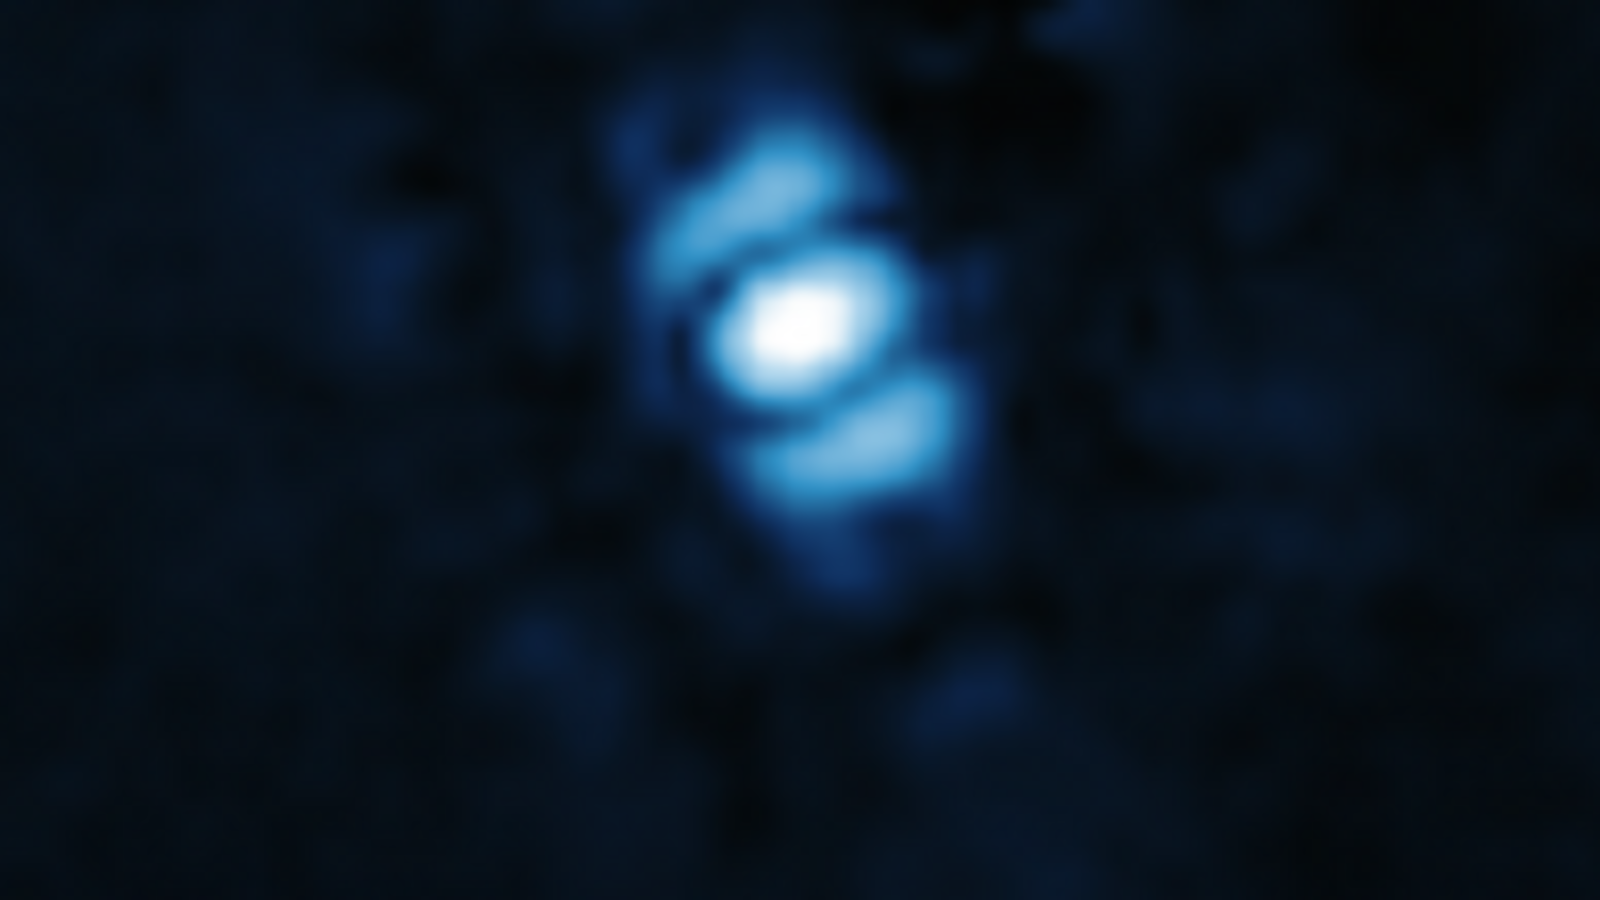 NASA's James Webb Space Telescope takes its first image of planet outside solar system